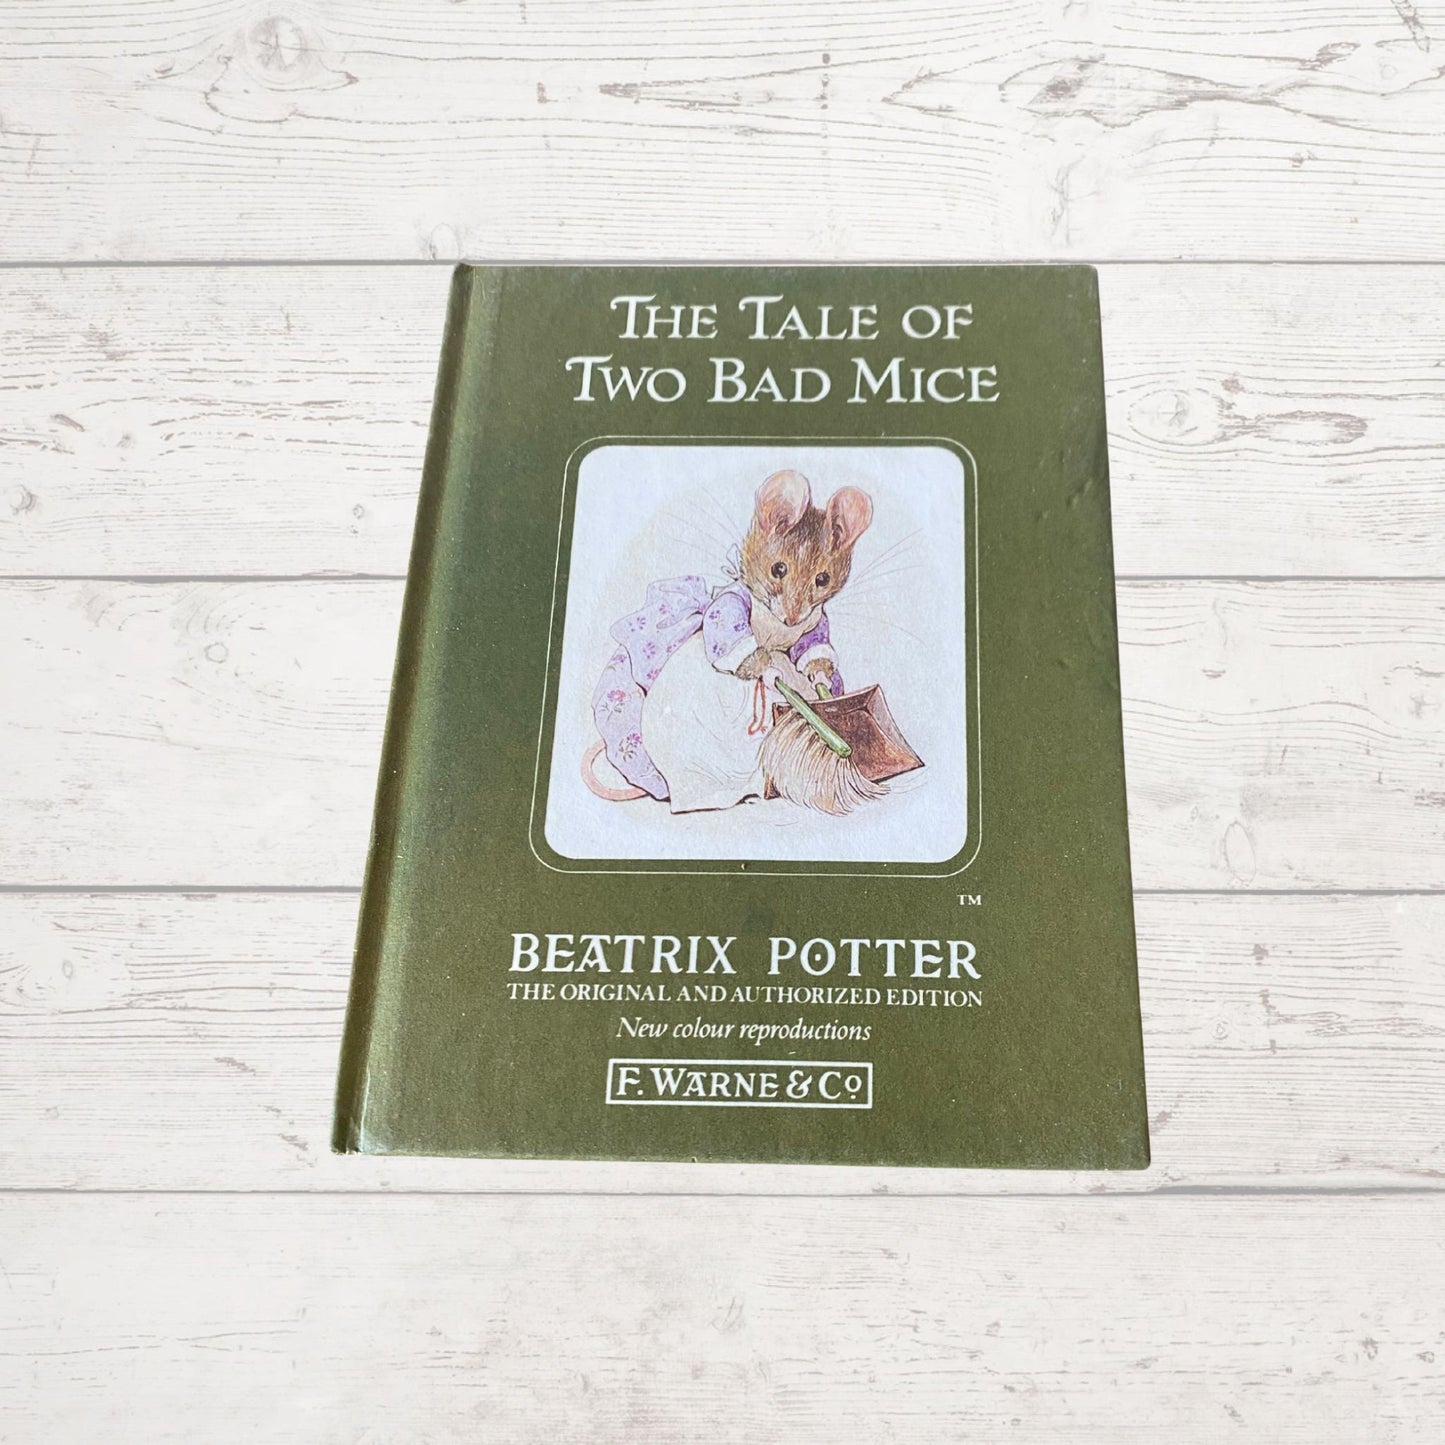 The Tale of Two Bad Mice. Vintage Beatrix Potter book. 1991 edition.